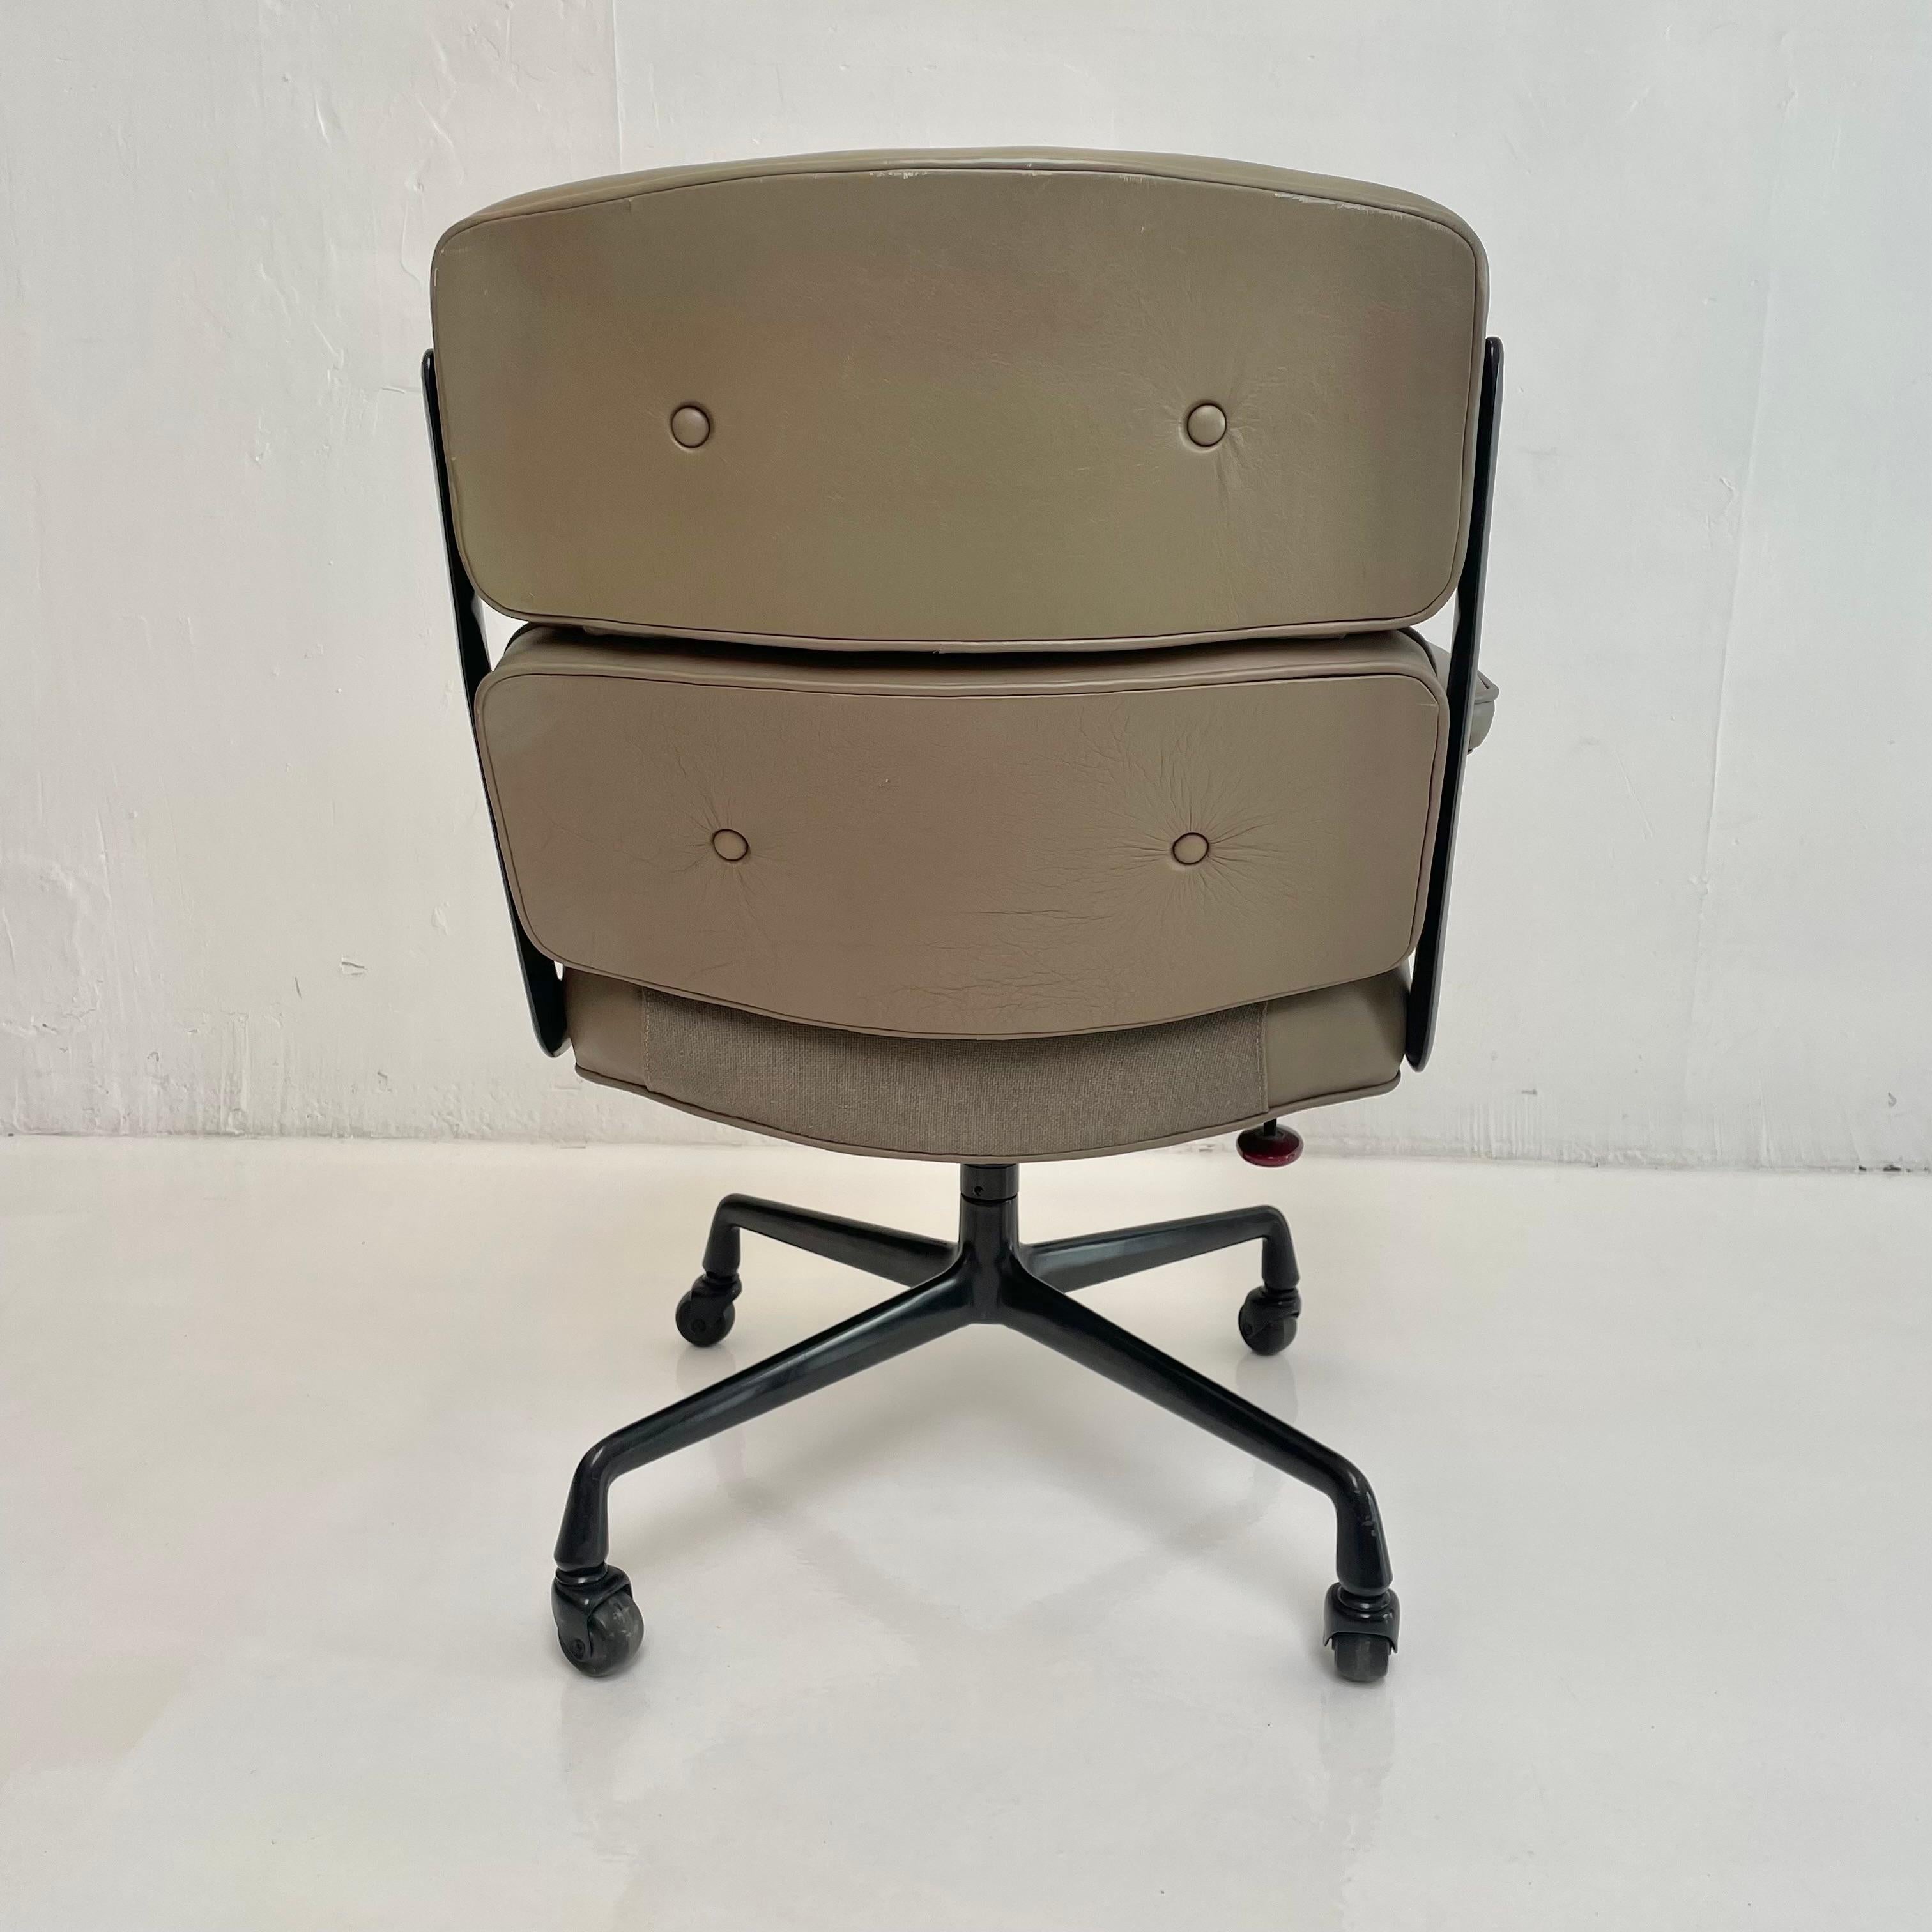 Late 20th Century Eames Time Life Chair in Olive Leather for Herman Miller, c. 1984 USA